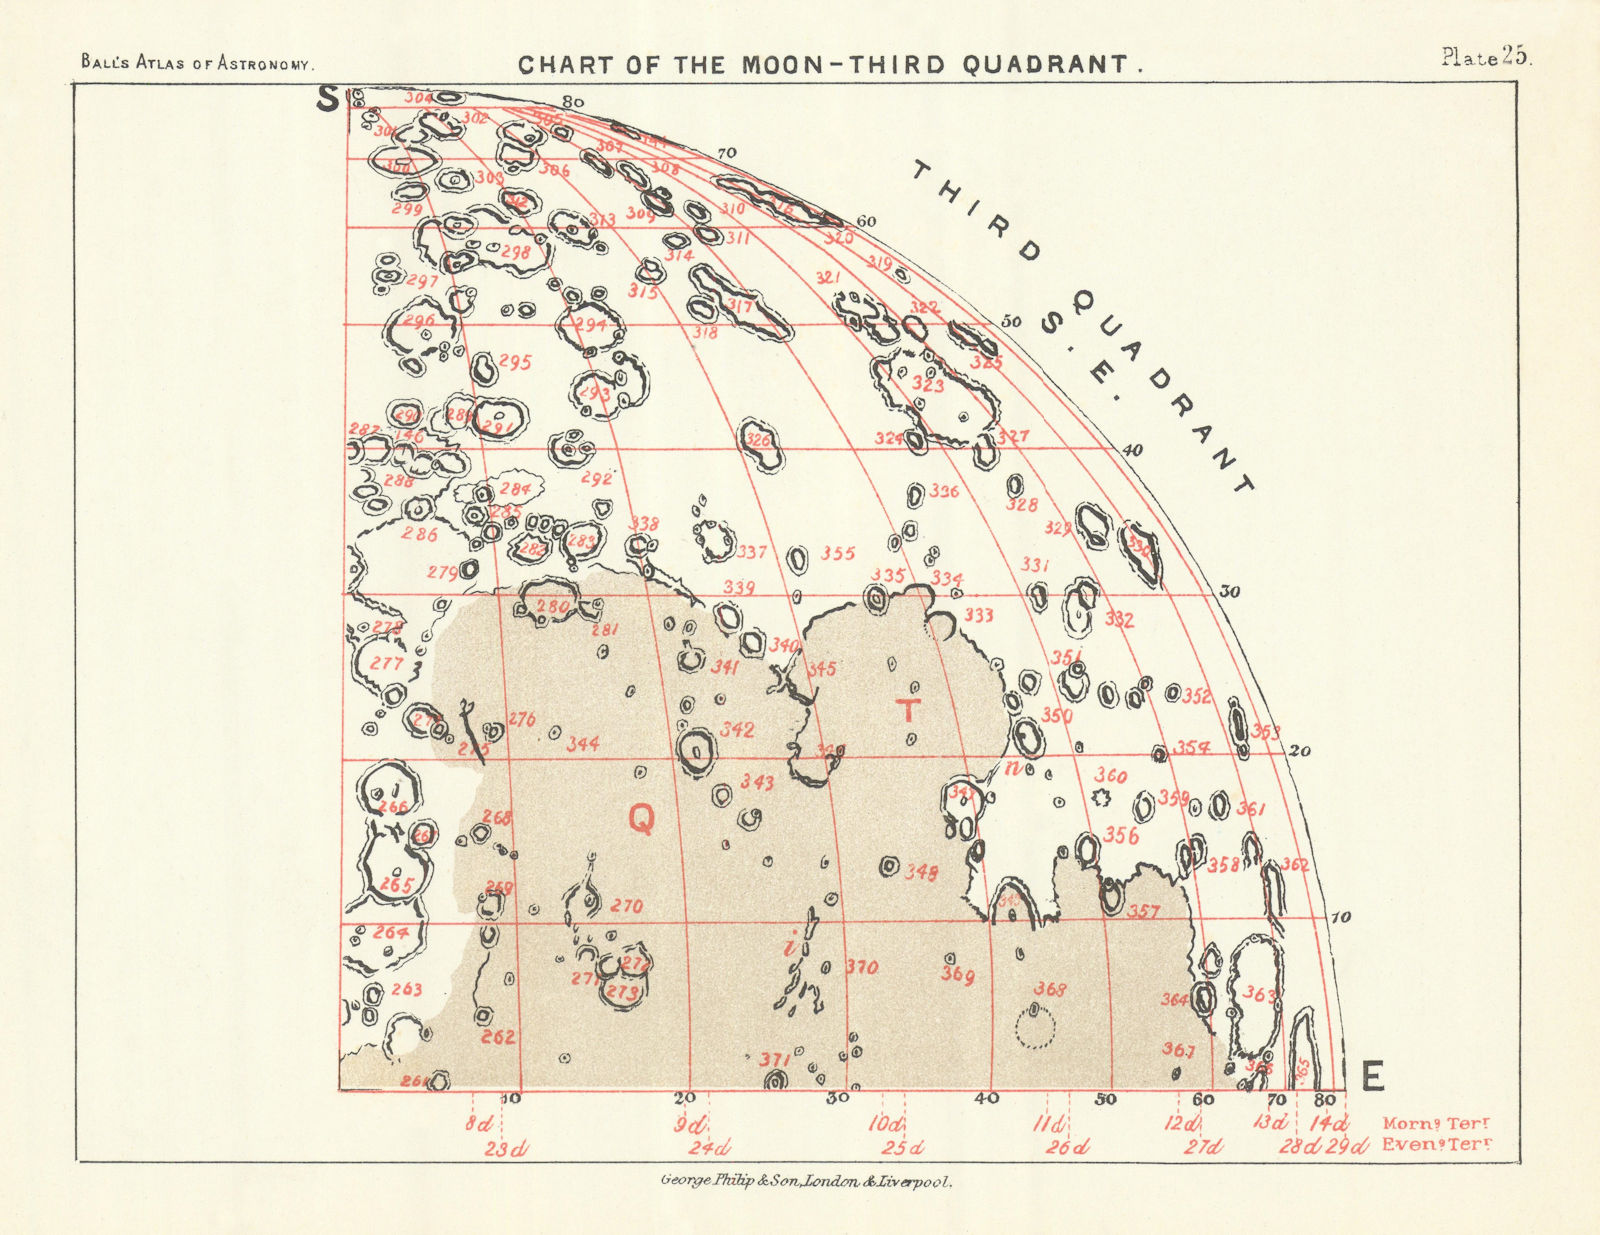 Chart of the Moon 3rd Quadrant - South East - by Robert Ball. Astronomy 1892 map